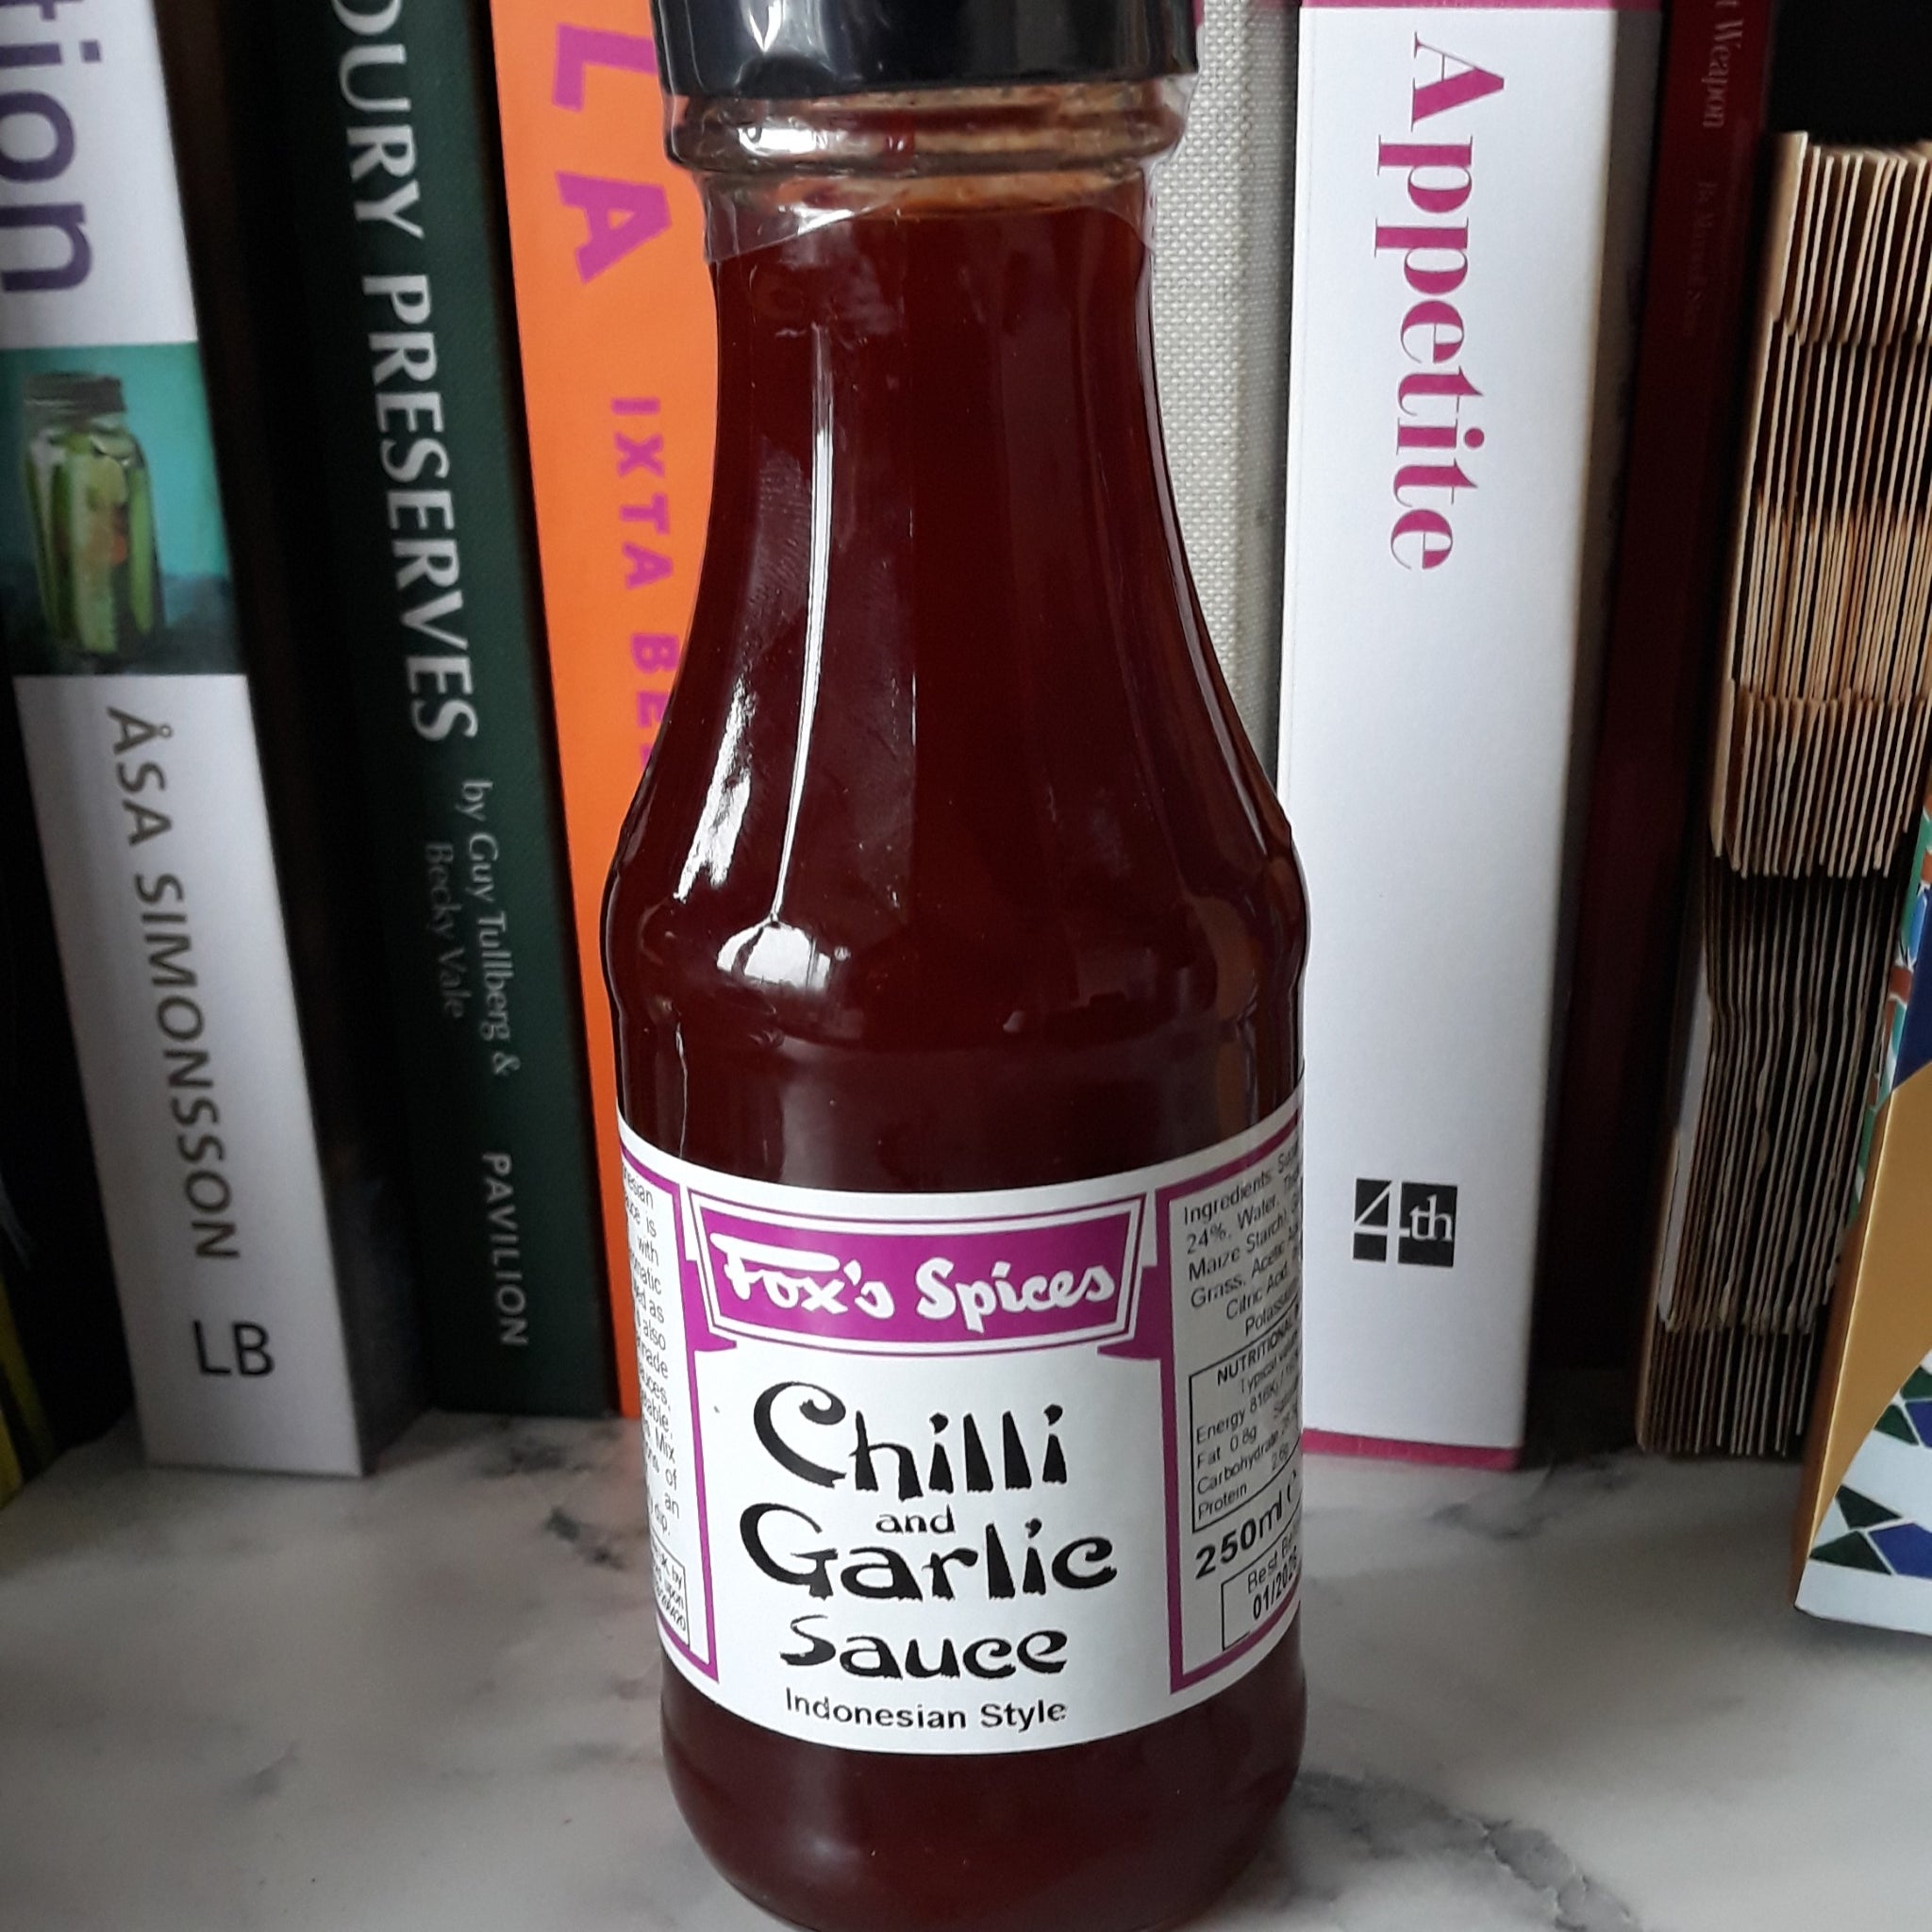 Chilli and Garlic sauce in a 250ml bottle supplied by Fox's Spices.